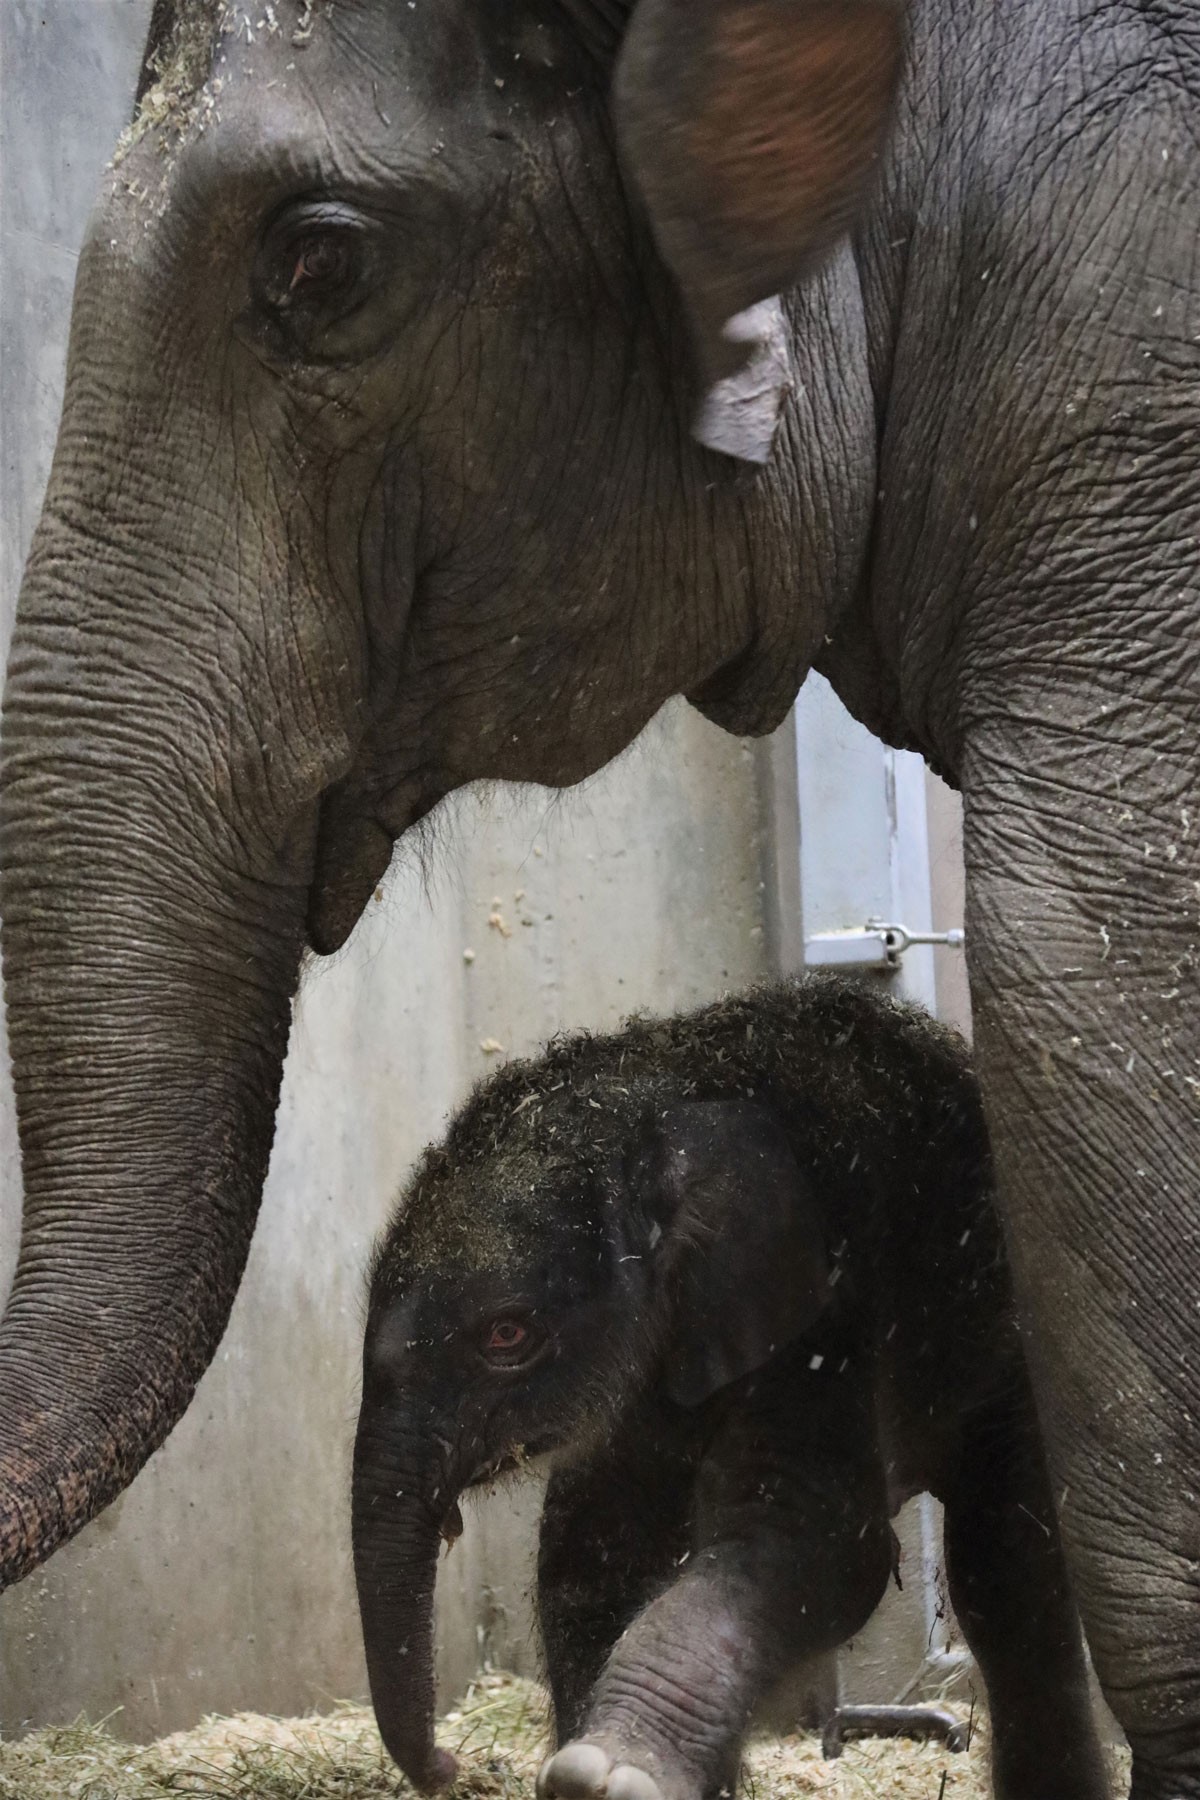 RIP Avi: Baby Elephant Dies After 27 Days in Saint Louis Zoo | News Blog